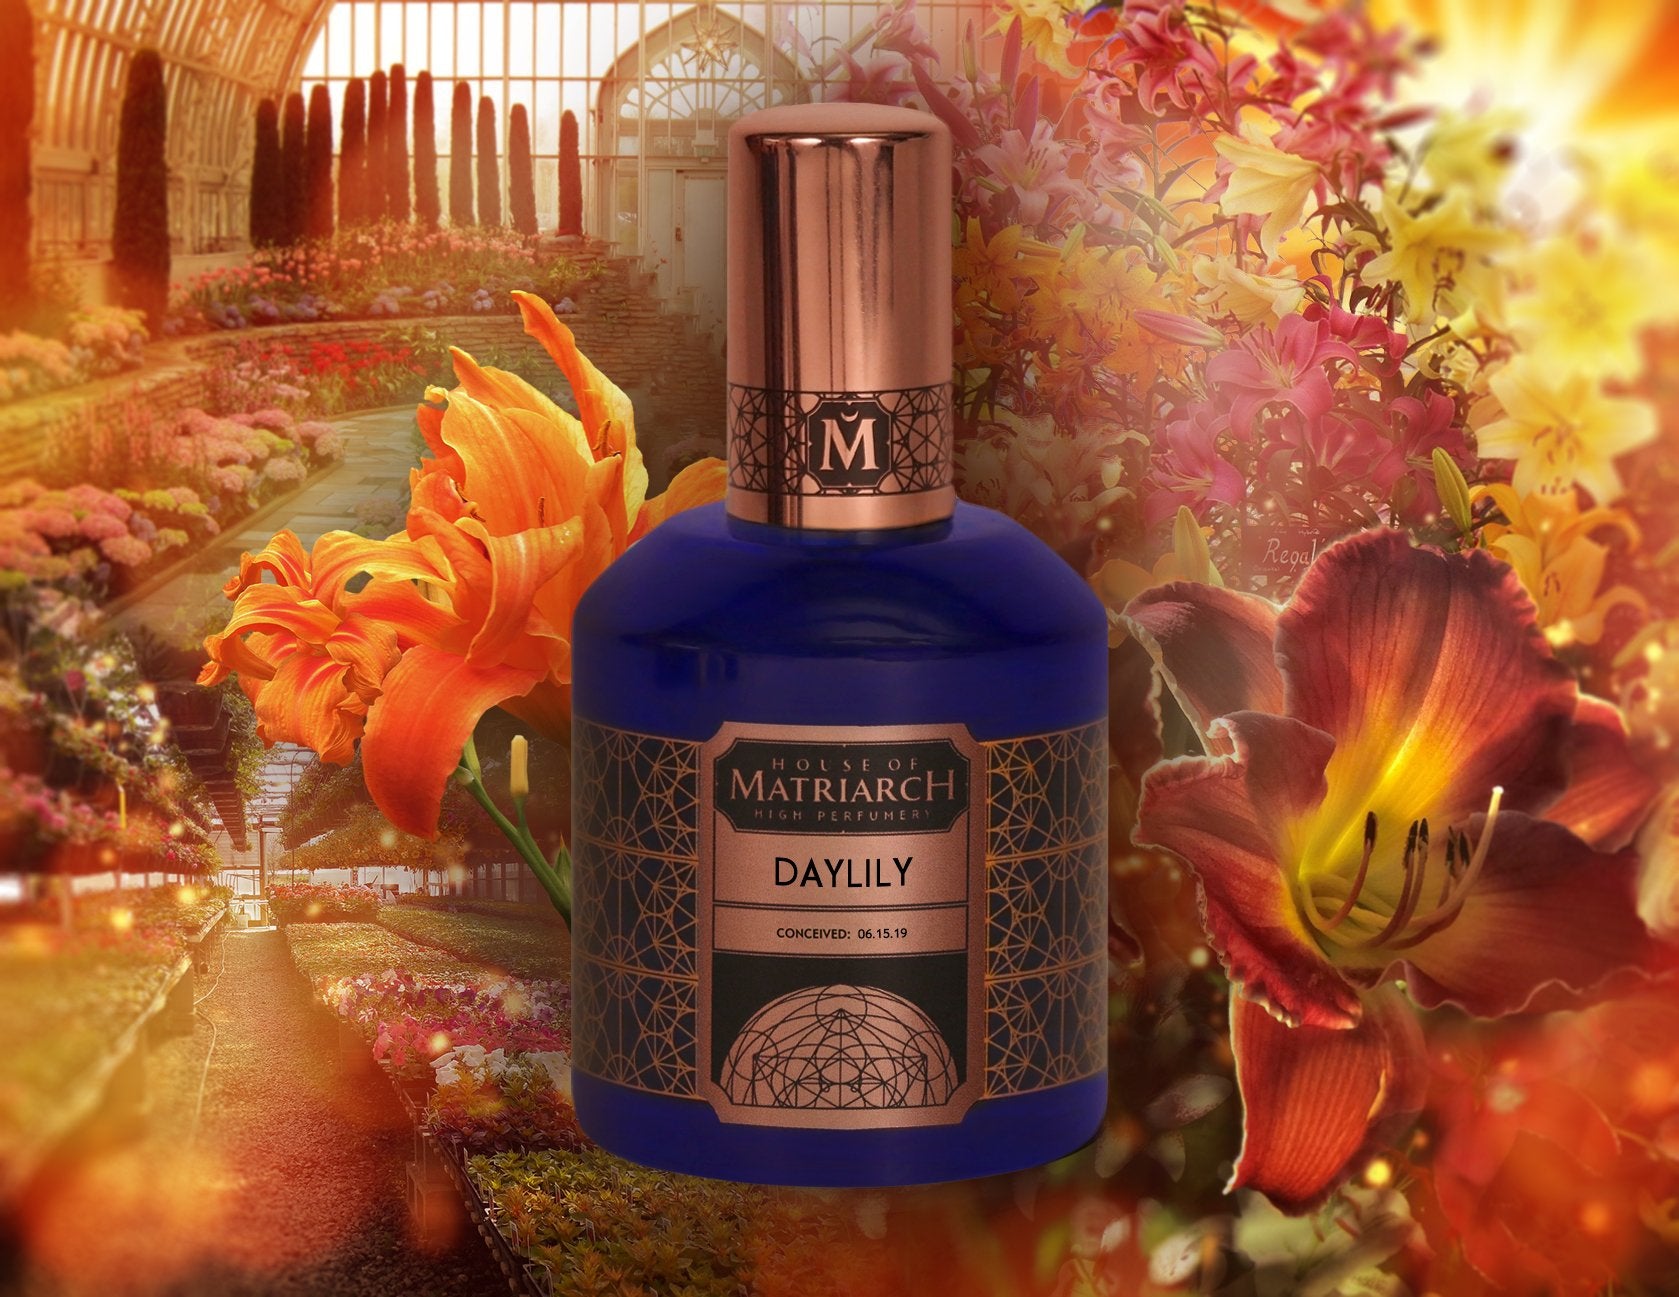 DAYLILY - NATURAL FANTASY FLORAL - NEW HIGH PERFUMERY FROM HOUSE OF MATRIARCH